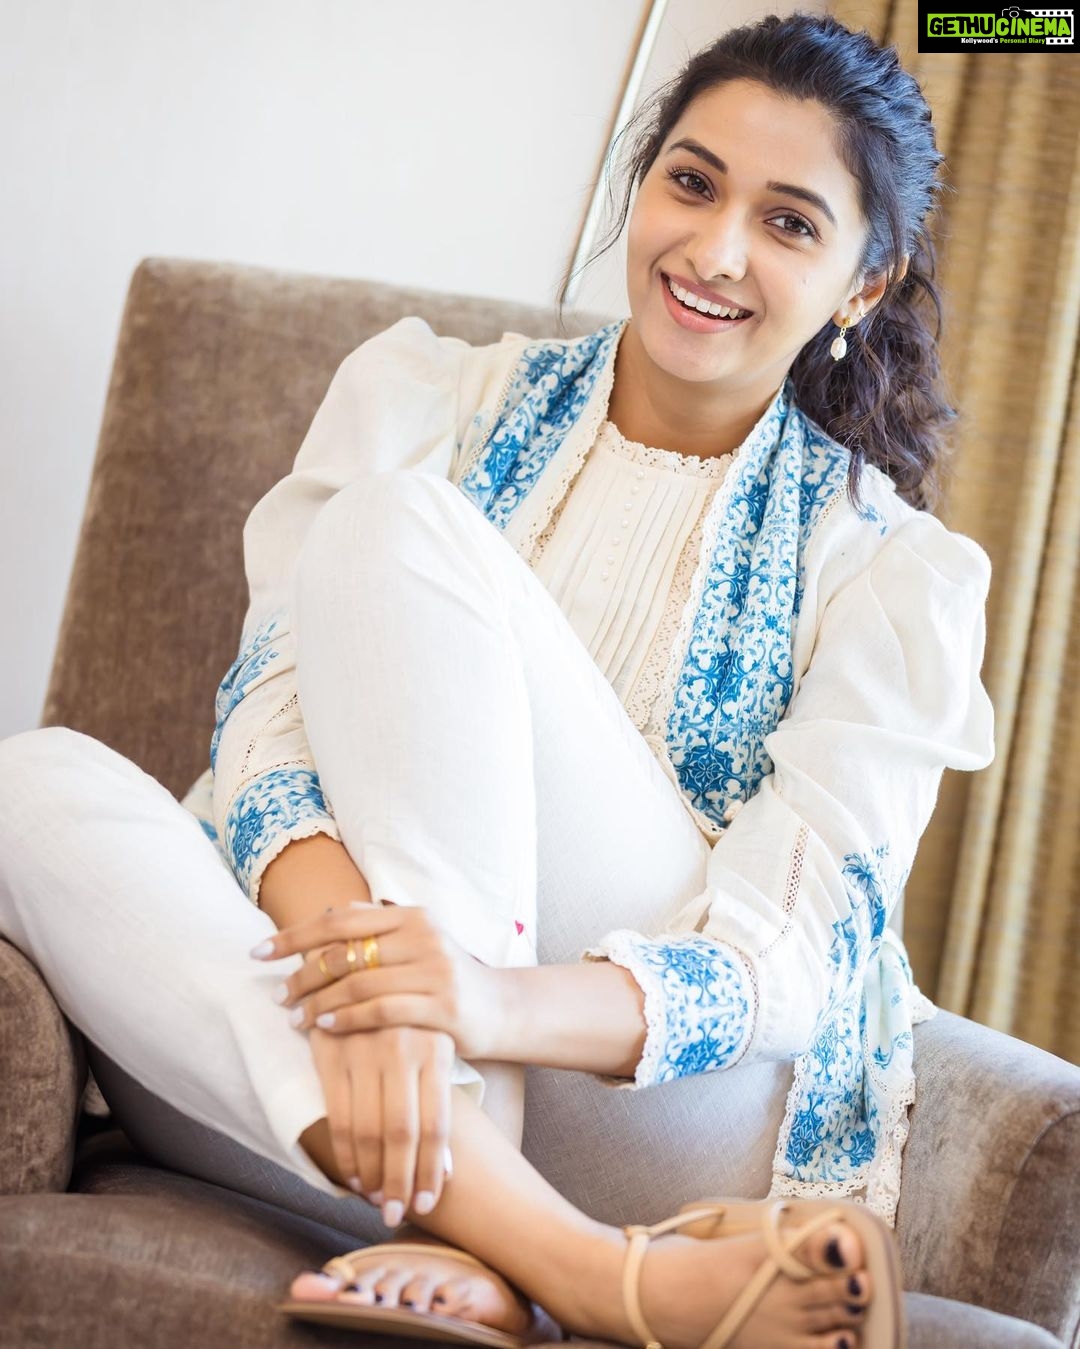 Priya Bhavani Shankar Sex - Priya Bhavani Shankar Wiki, Biography, Age, Gallery, Spouse and more